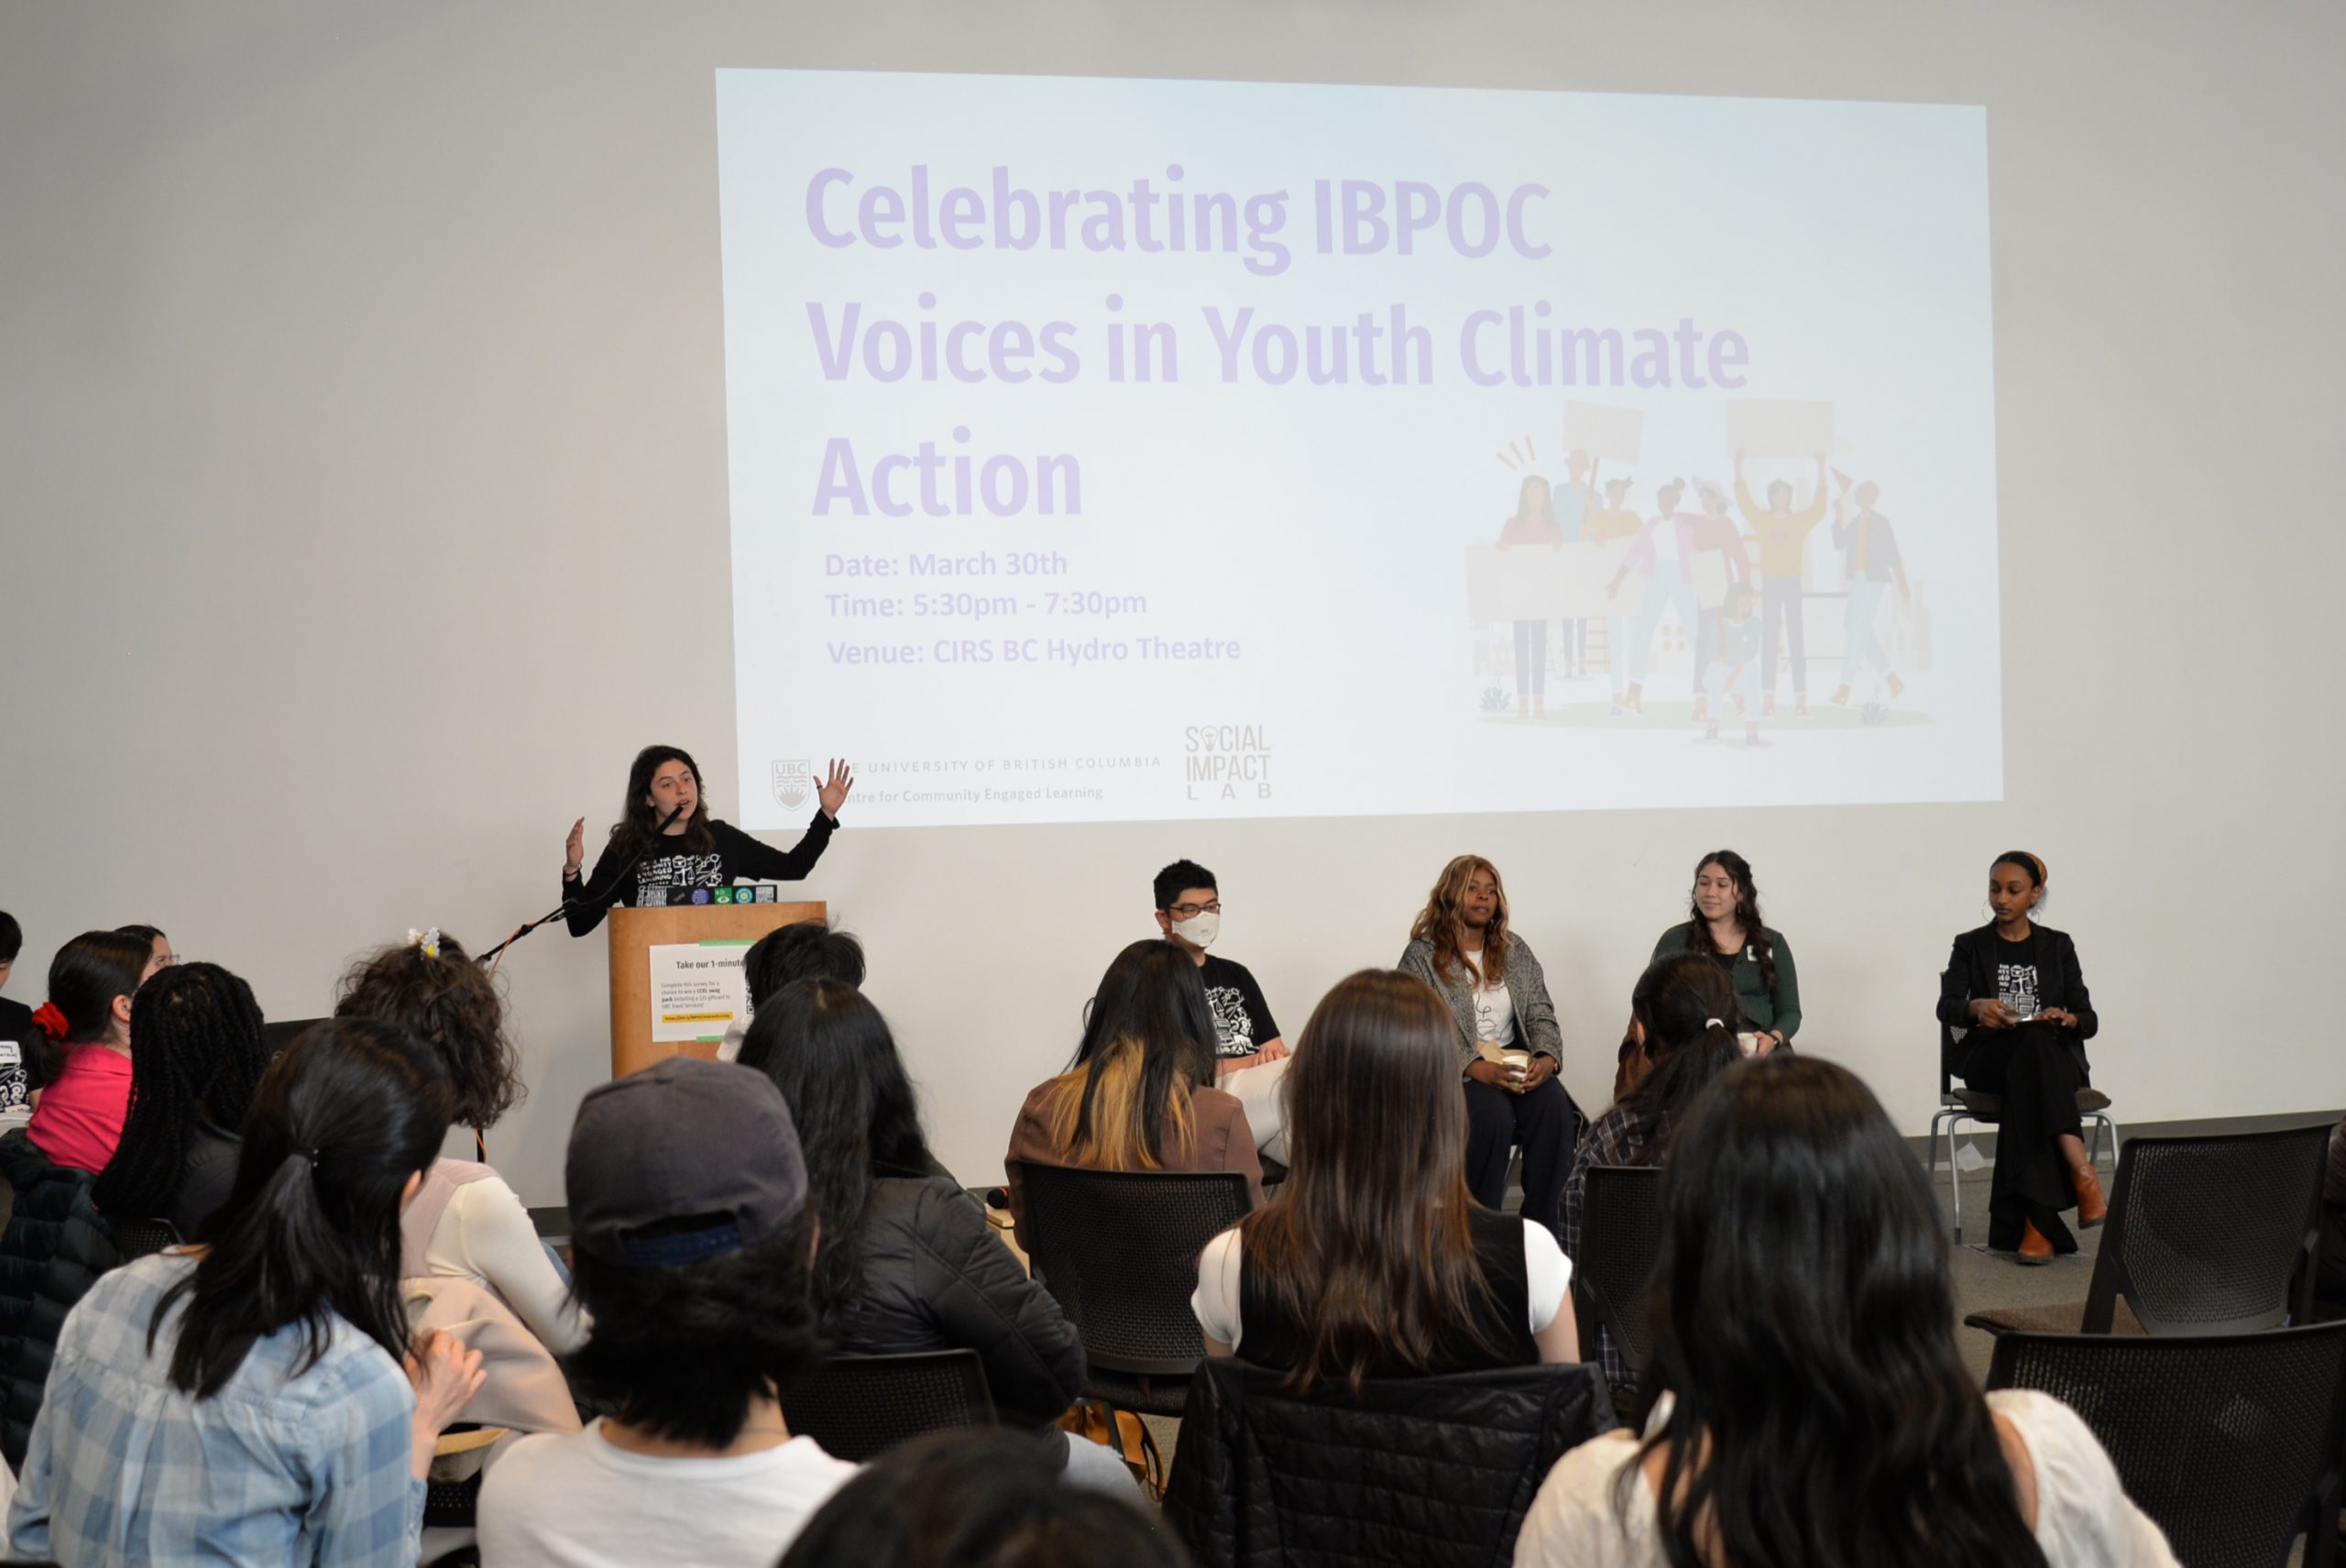 Celebrating IBPOC Voices in Youth Climate Action